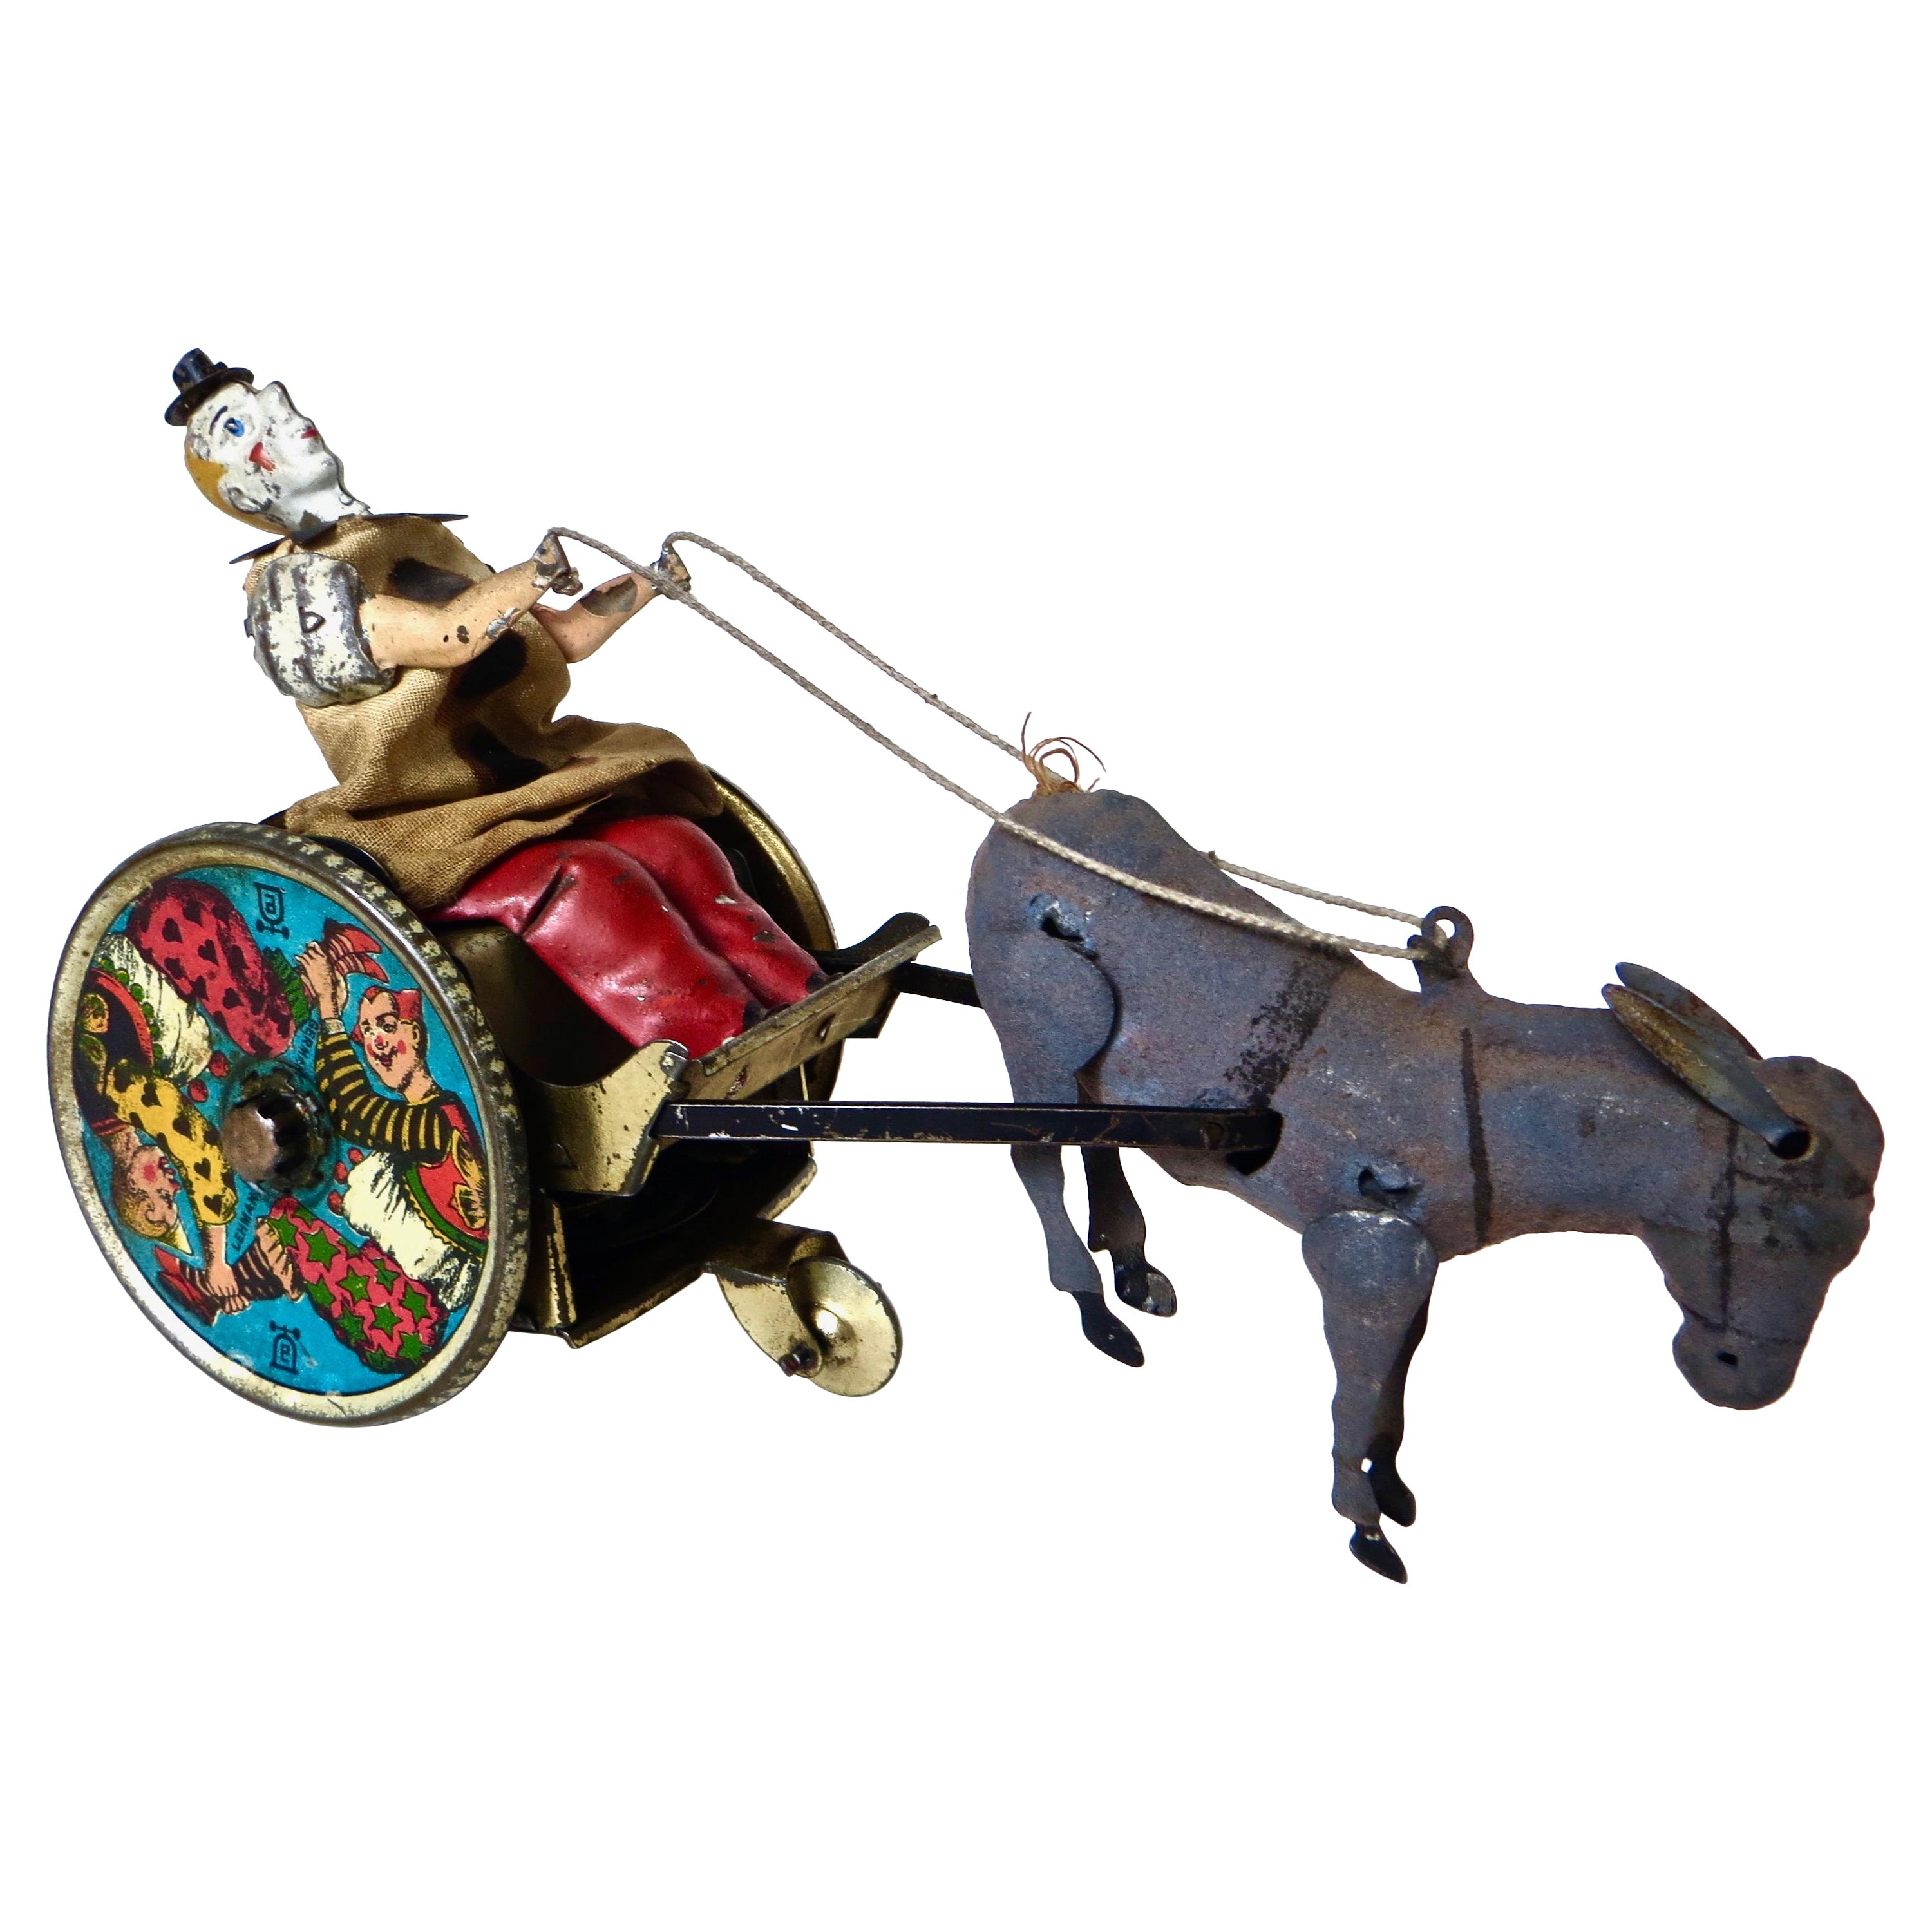 German Tinplate Clockwork Wind Up Toy by the Lehman Co. "Balky Mule" Circa 1909 For Sale